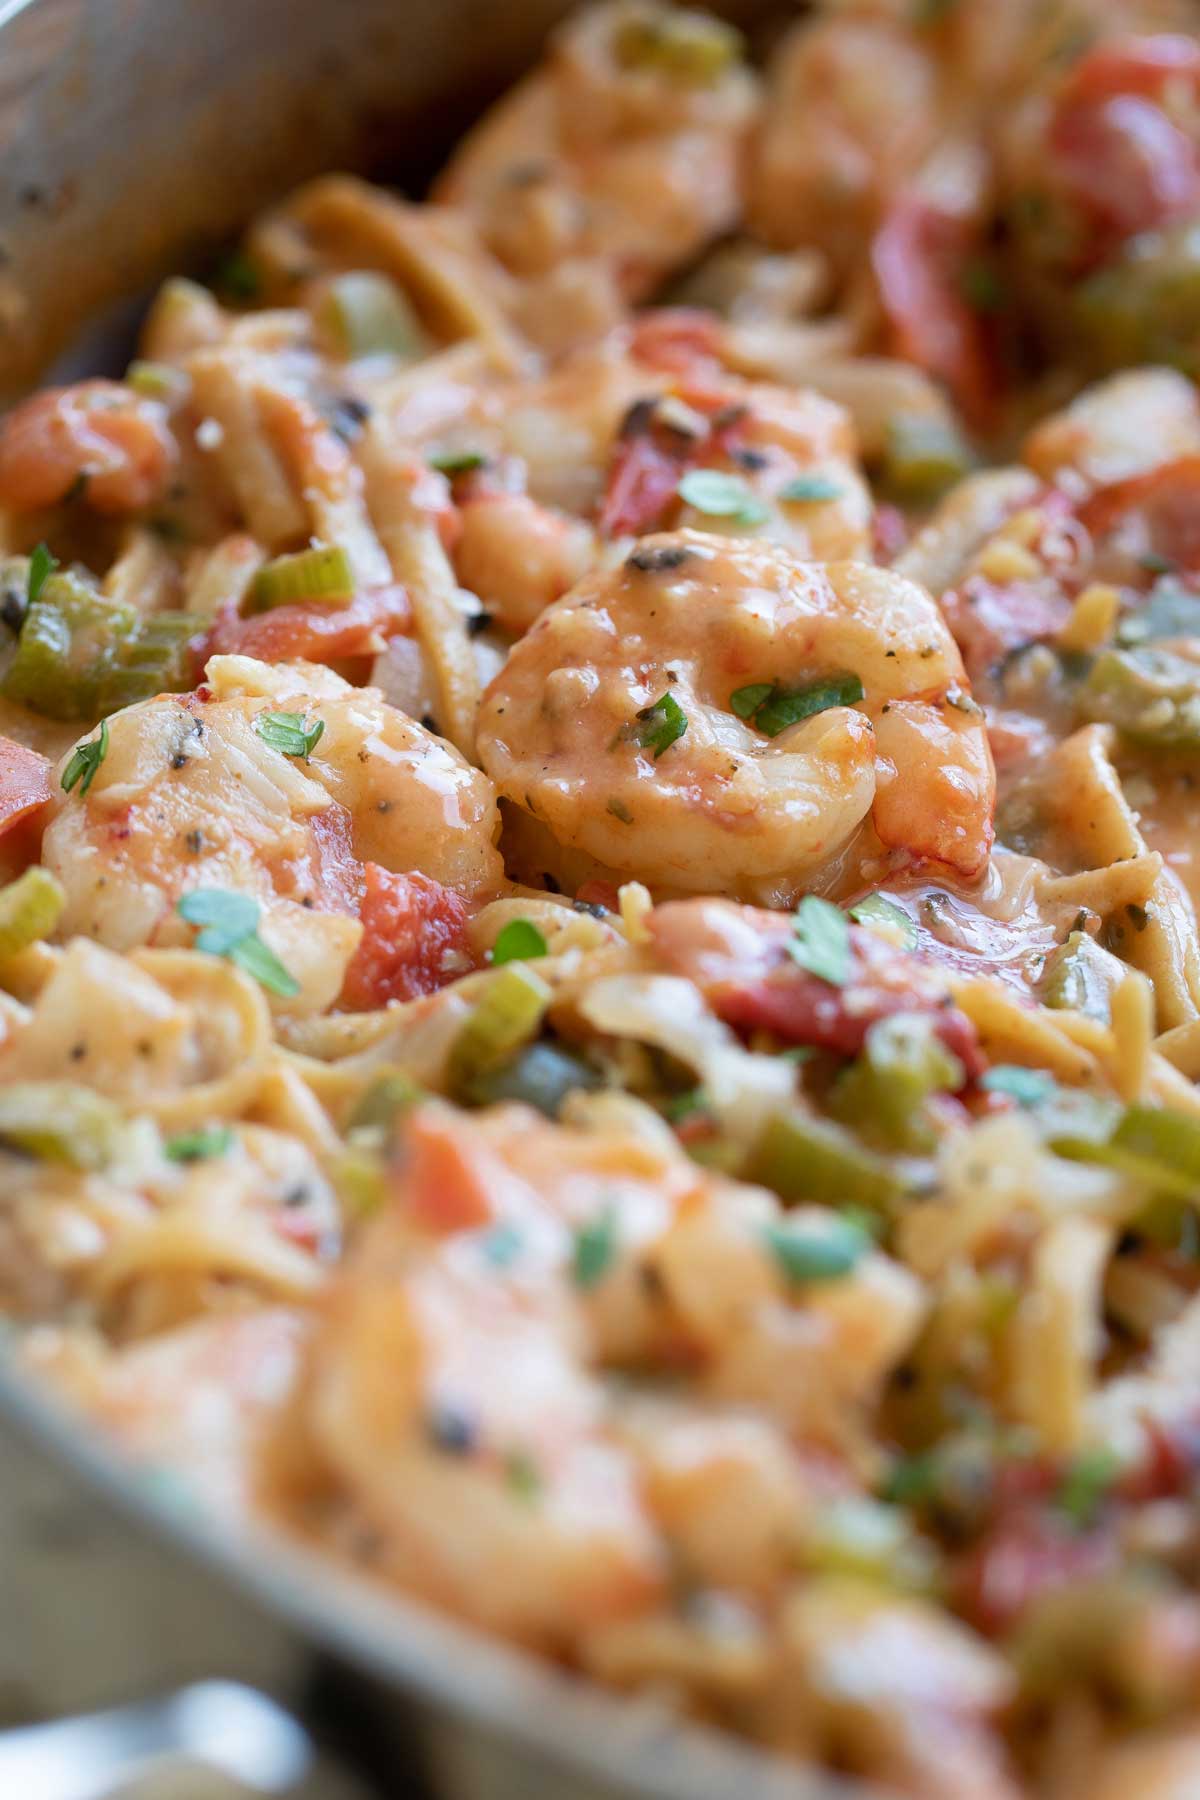 Closeup of the shrimp, still in the pan, sitting on top of the pasta and dotted with creamy sauce and bits of parsley.